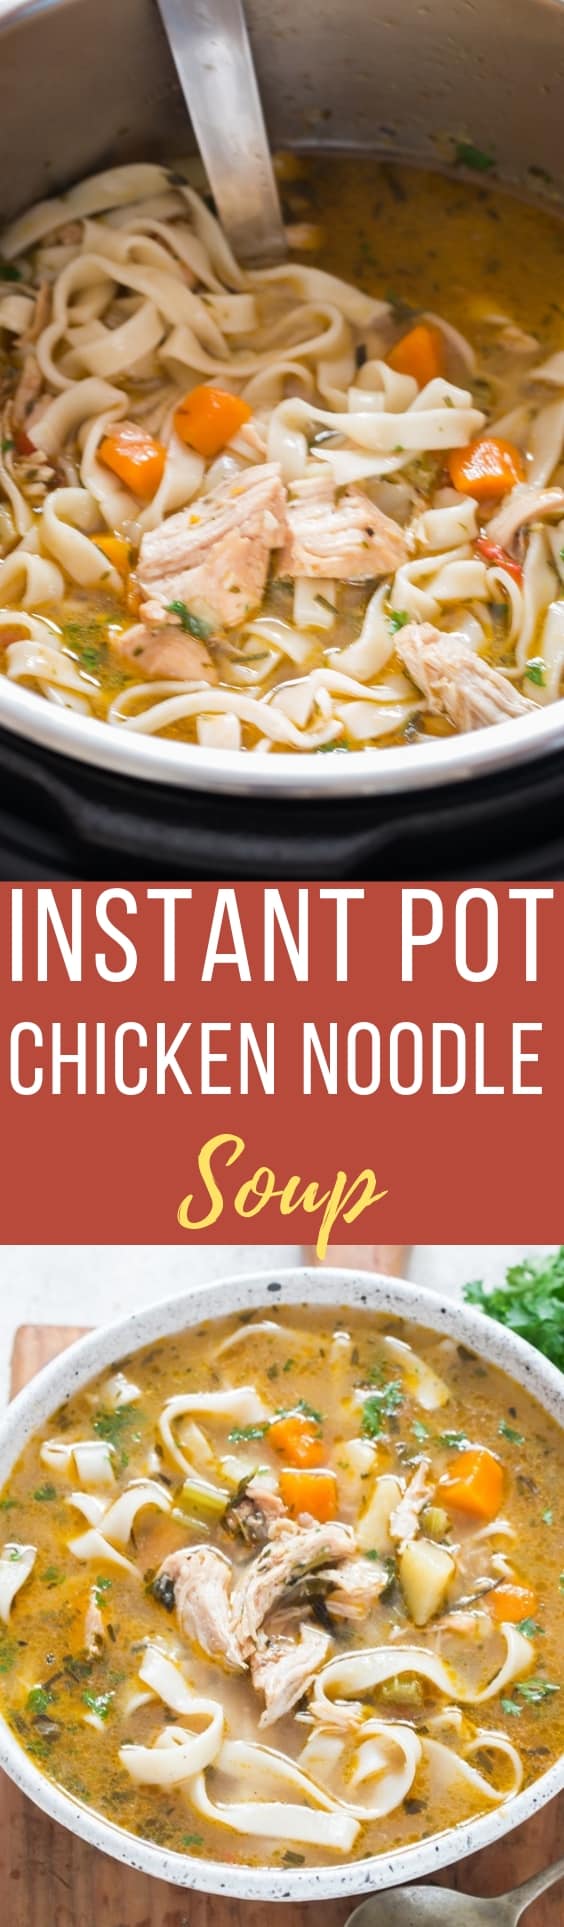 Instant Pot Chicken Noodle Soup with Text Overlay